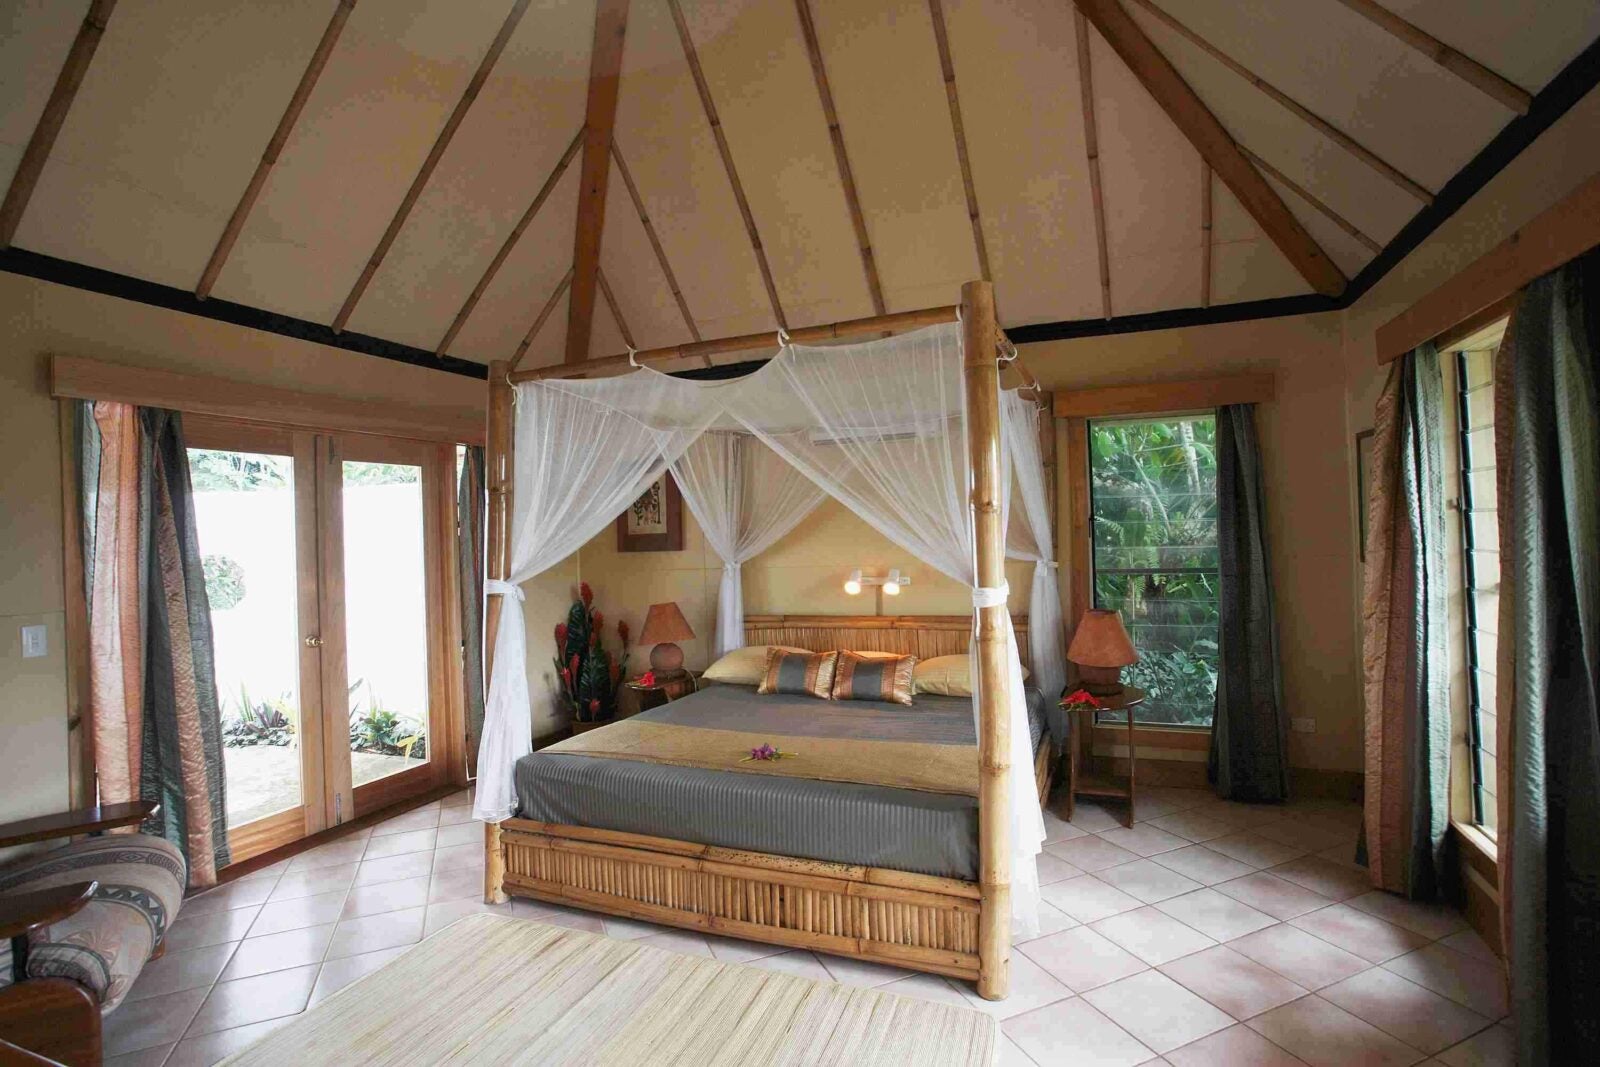 A king-sized bed with a canopy and white curtains in the middle of a big room with high ceiling.